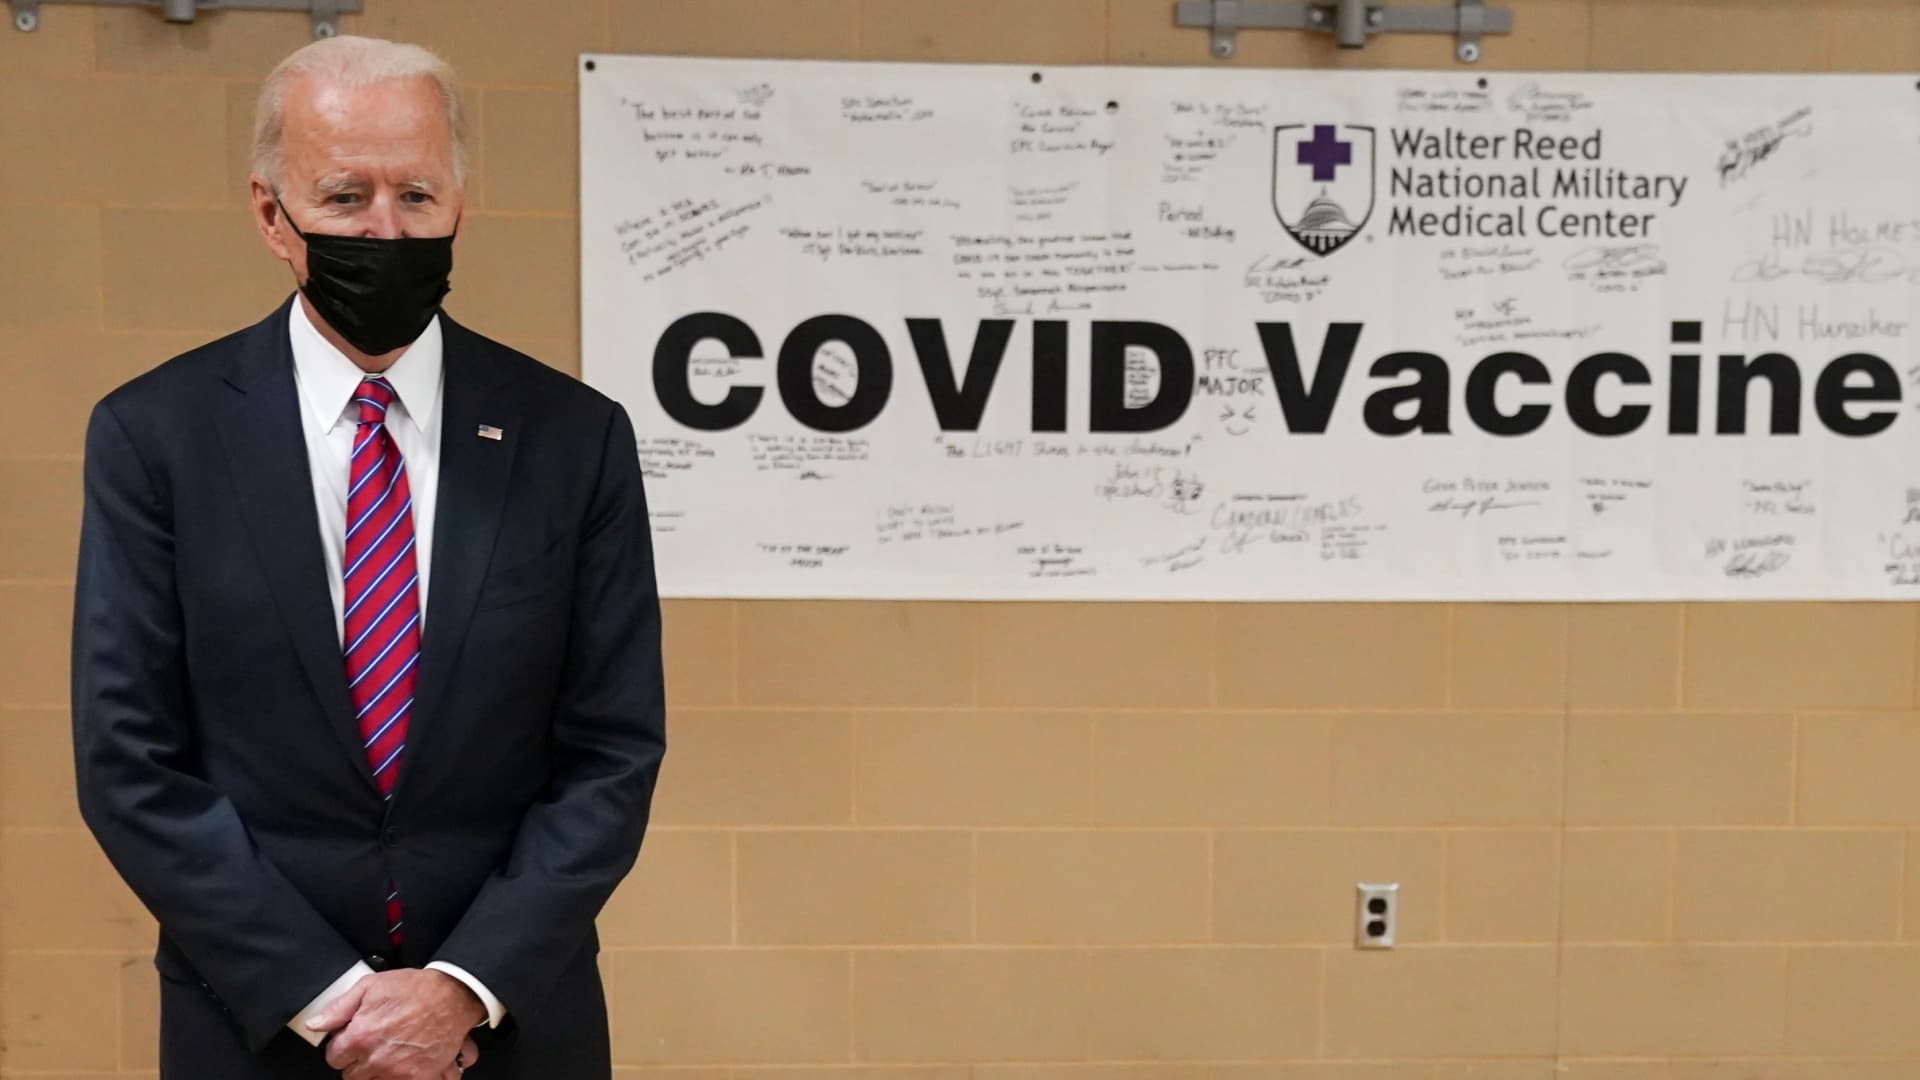 President Joe Biden visits a coronavirus disease (COVID-19) vaccination site during a visit to Walter Reed National Military Medical Center in Bethesda, Maryland, Jan. 29, 2021.